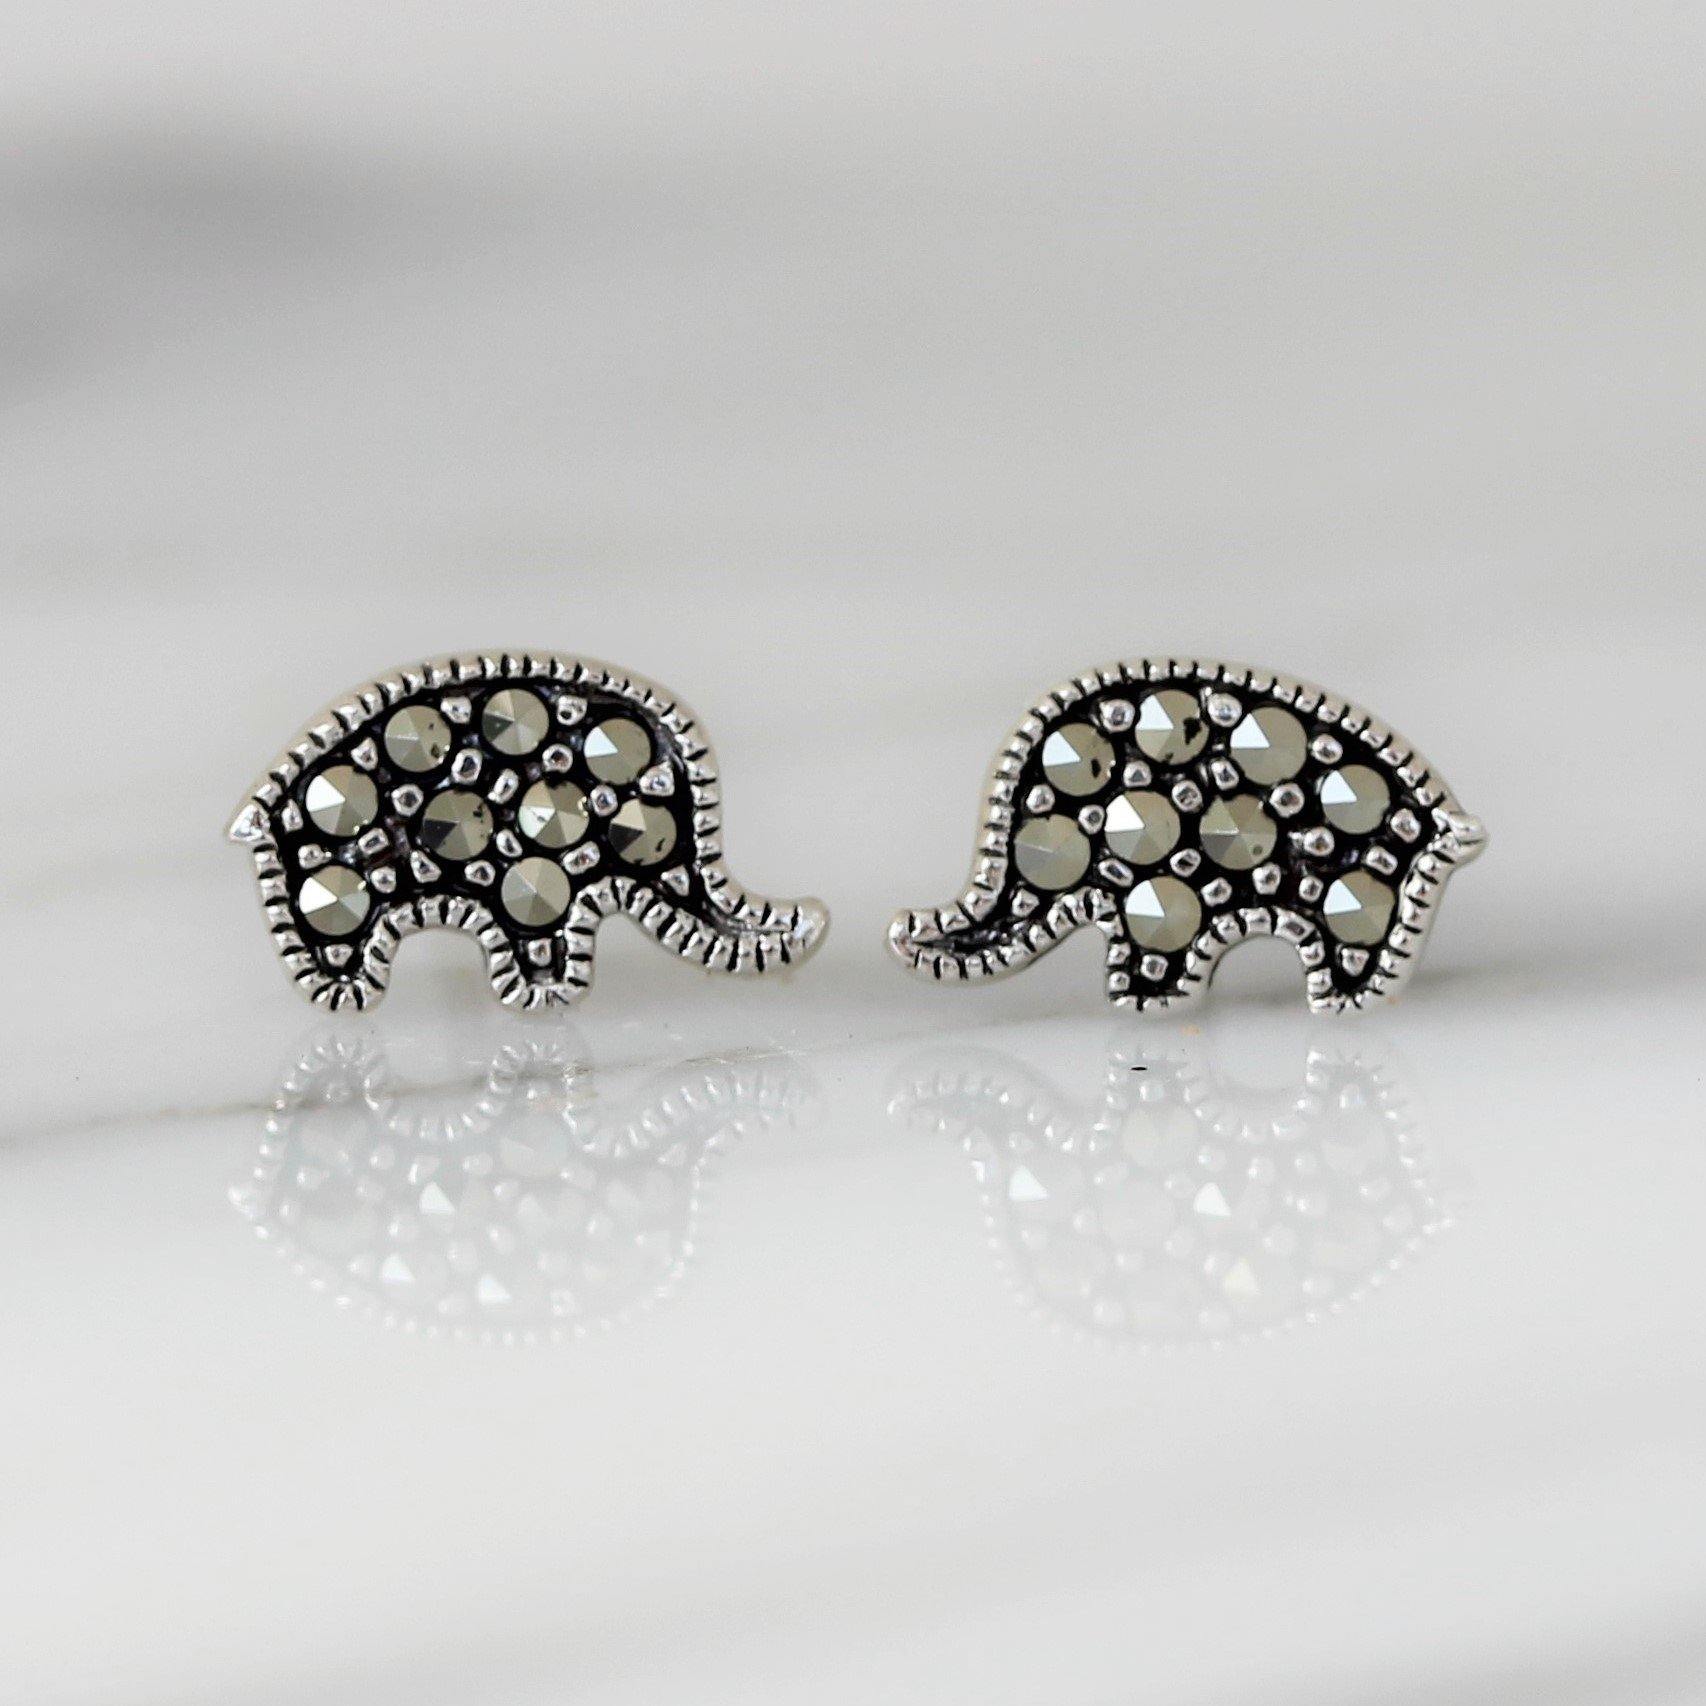 Sterling Silver Marcasite Elephant Earrings Studs Vintage Style - STERLING SILVER DESIGNS